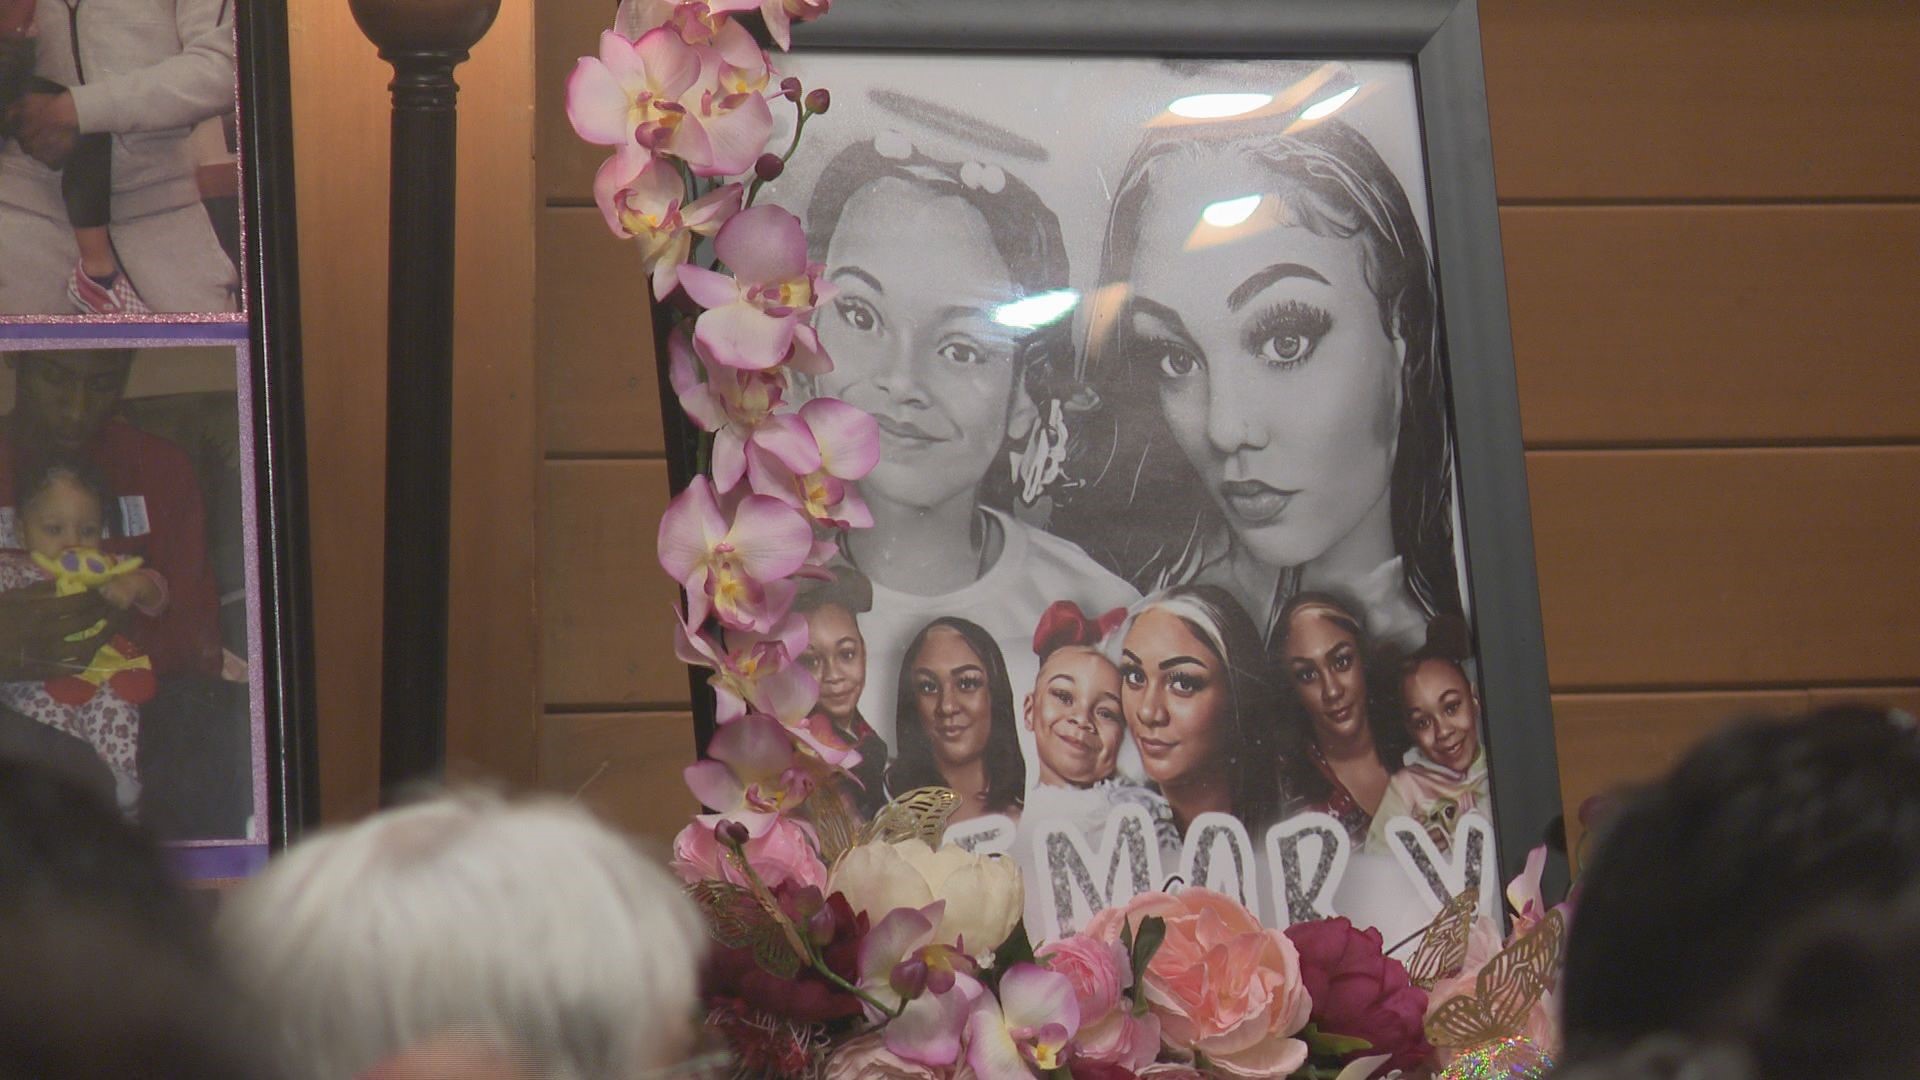 On Wednesday, dozens filled a small chapel to pay their respects and remember the lives of the mother and daughter, who were found murdered last month.